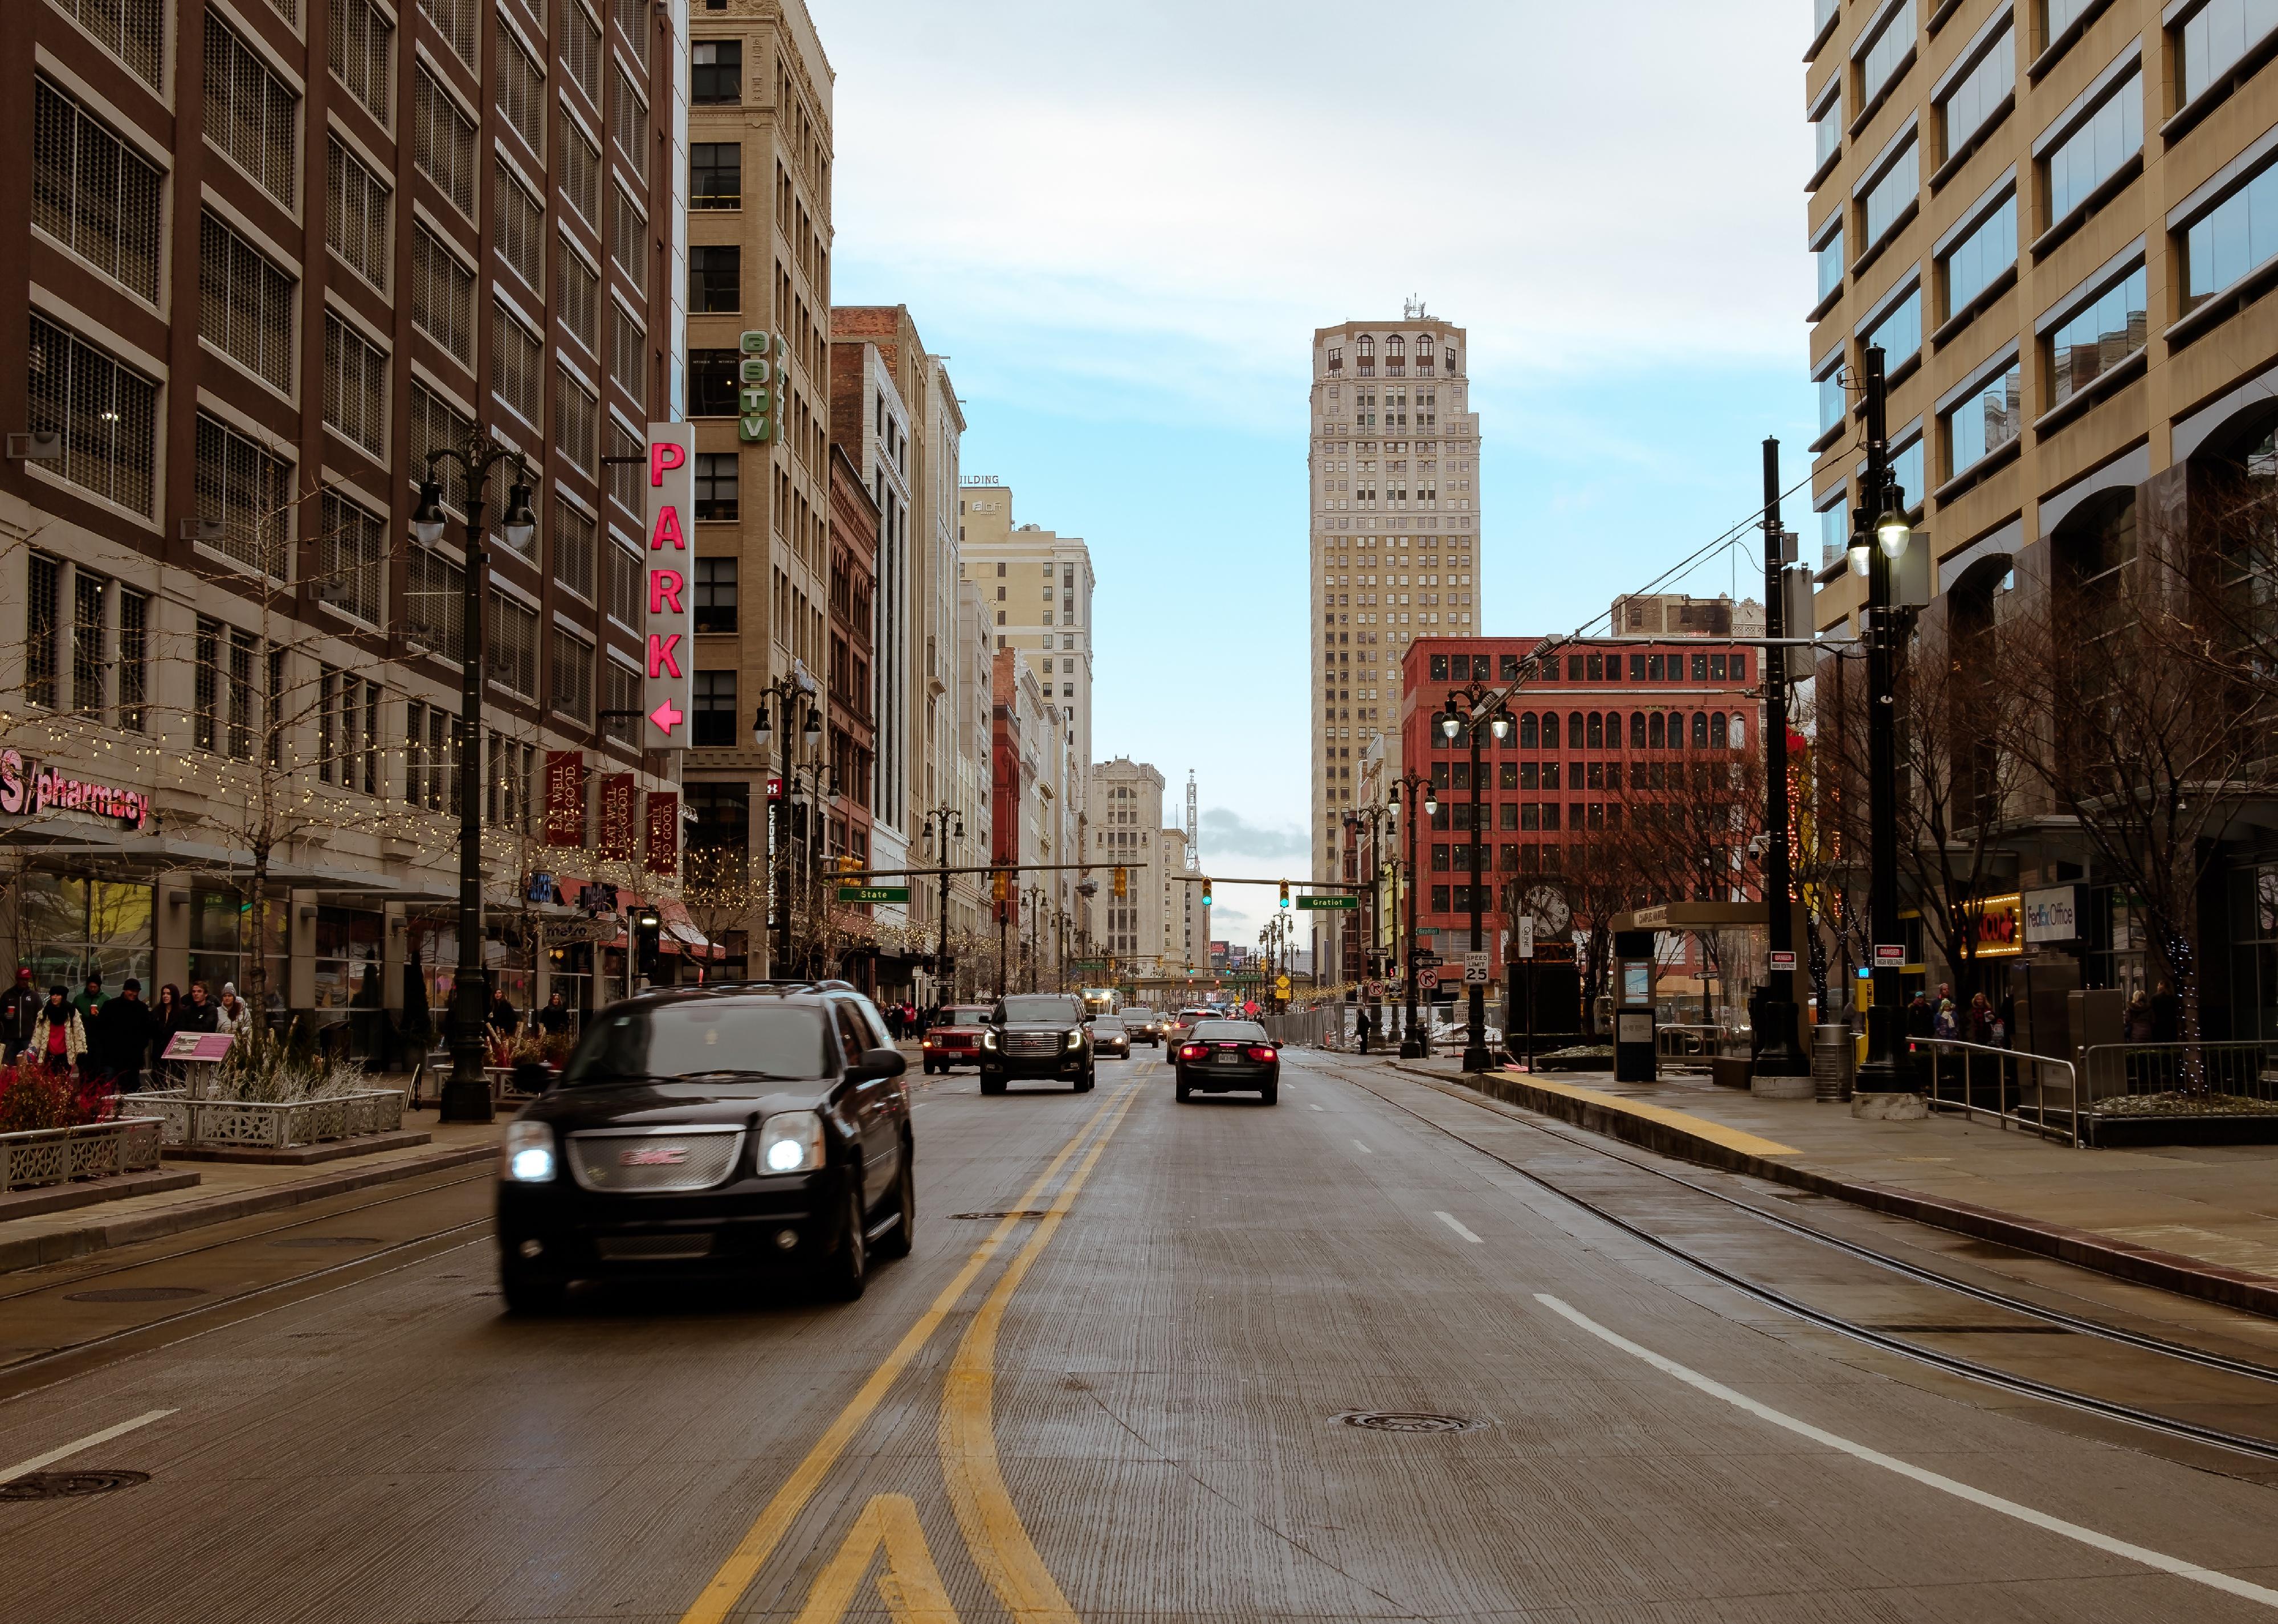 Street view of downtown area of Detroit.